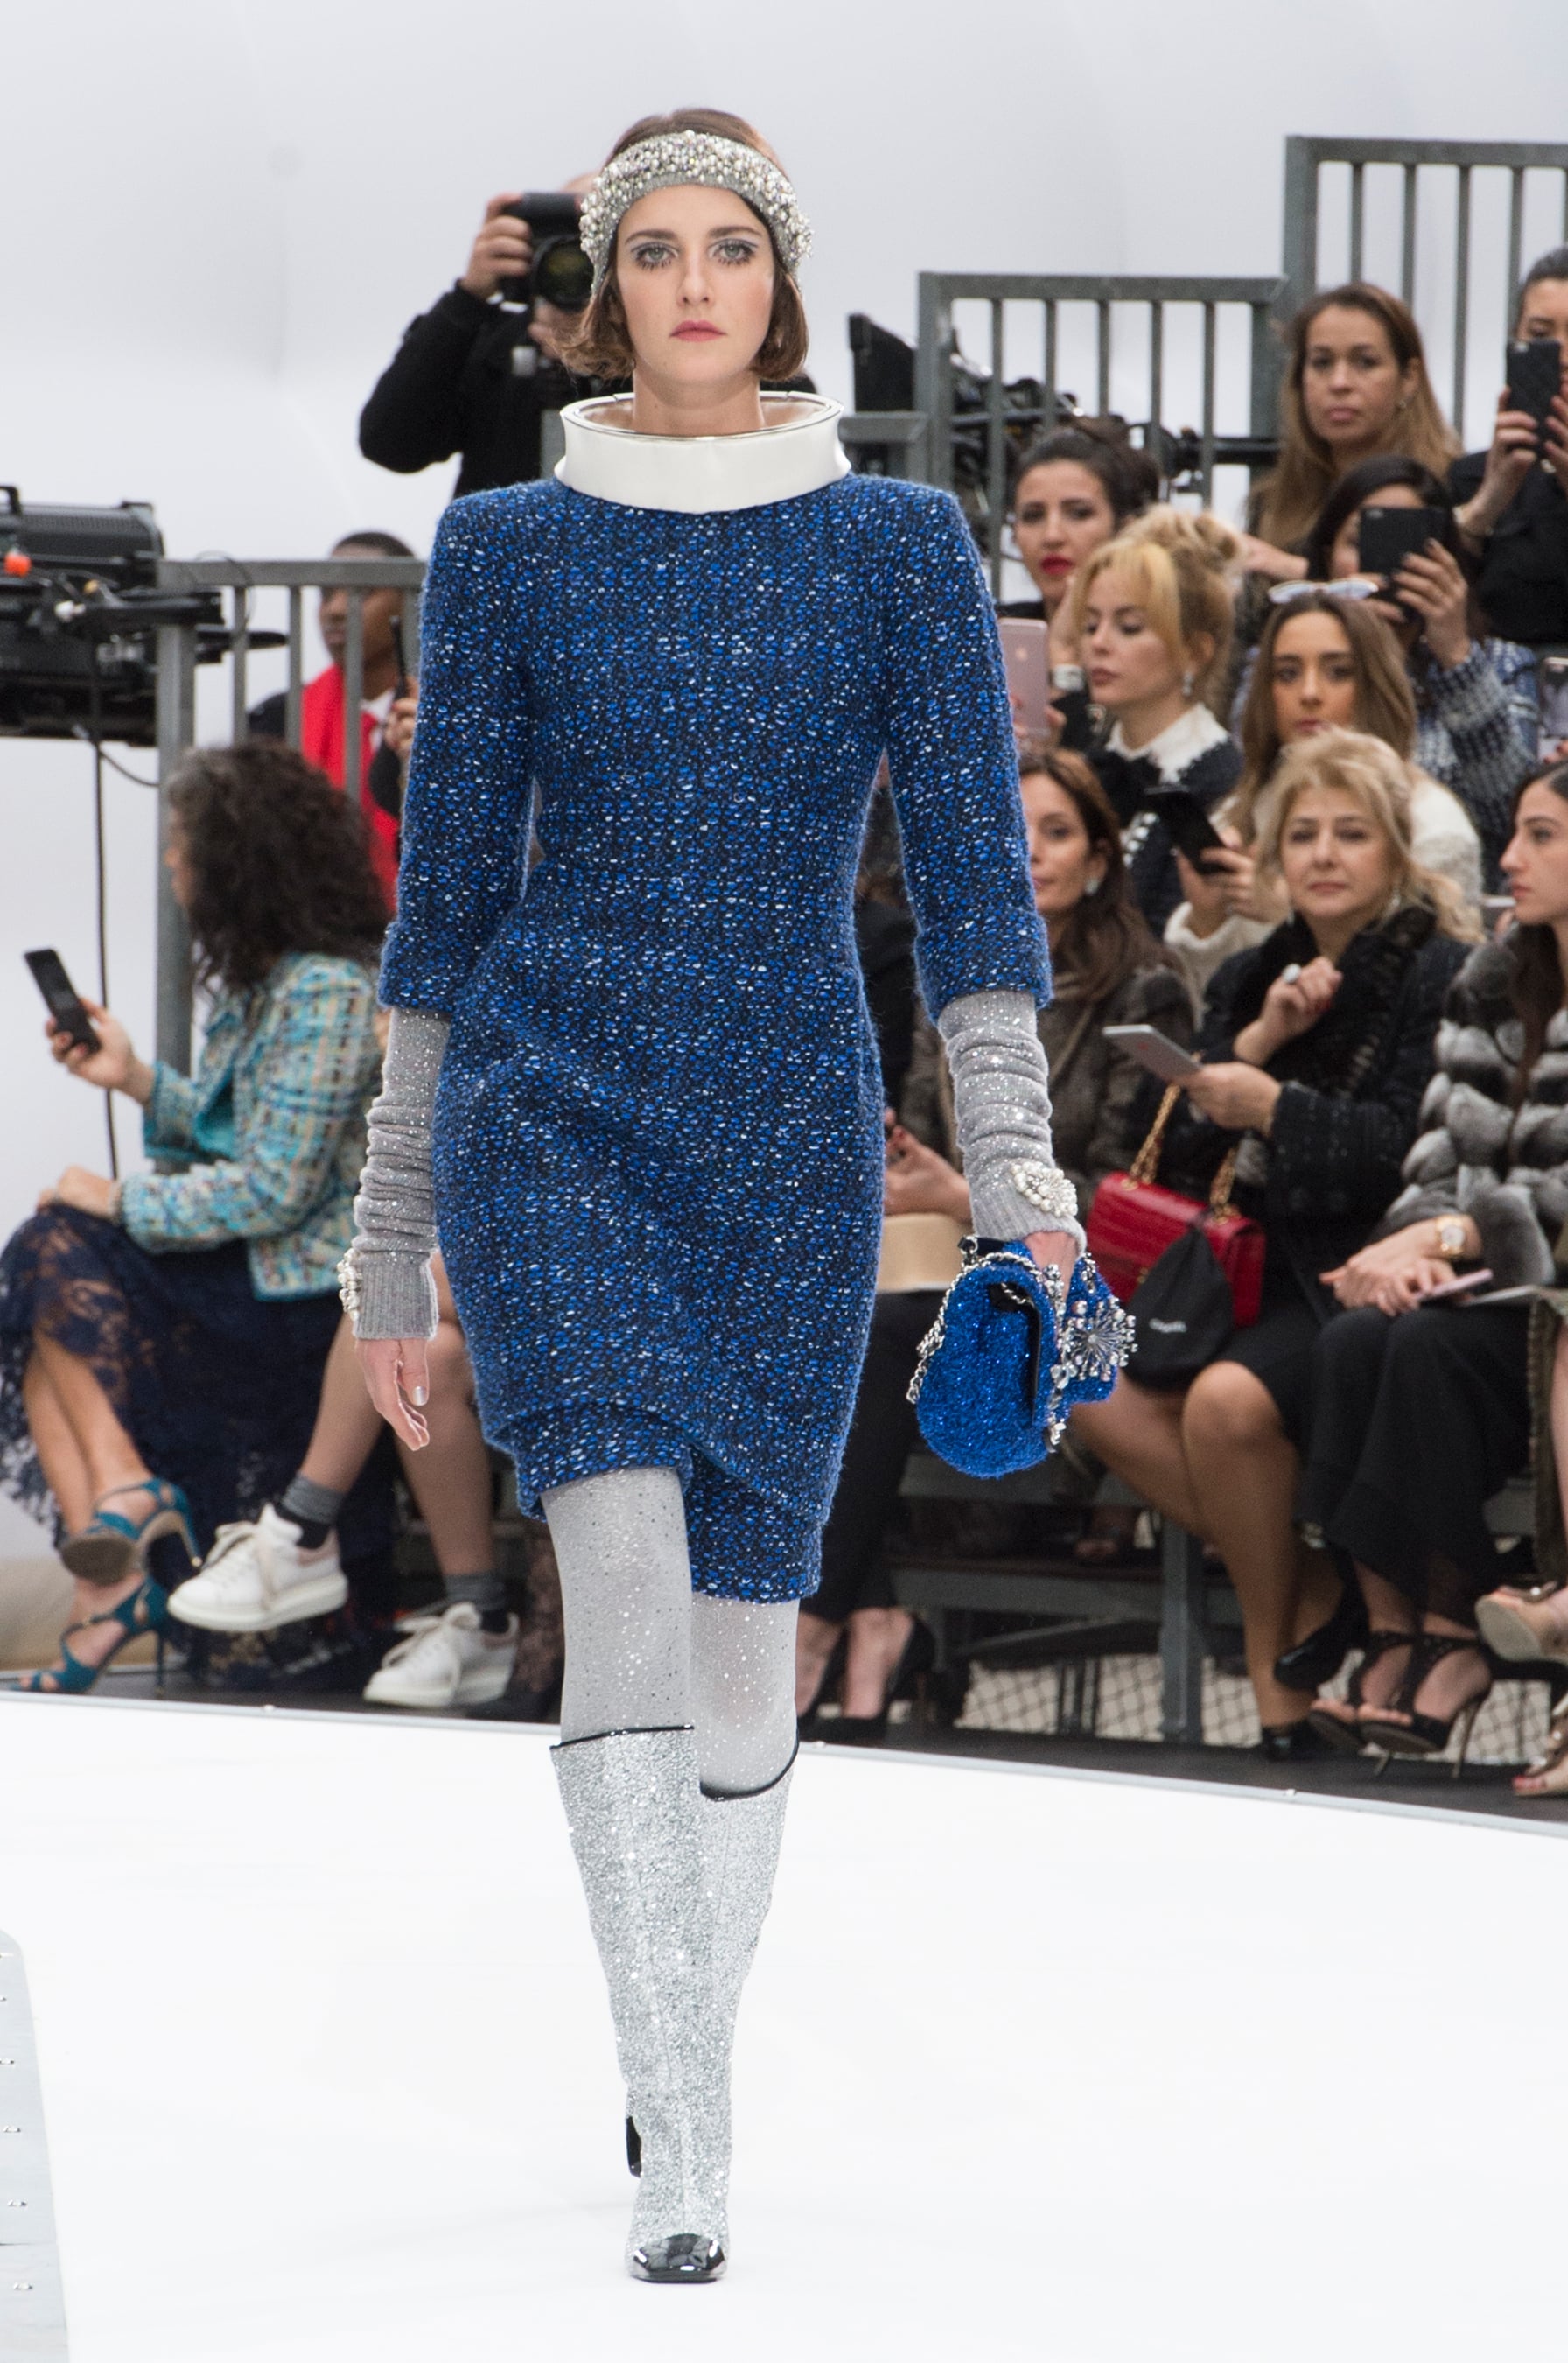 Fashion, Shopping & Style, Karl Lagerfeld Shows Us What the Chanel Uniform  Looks Like in Space